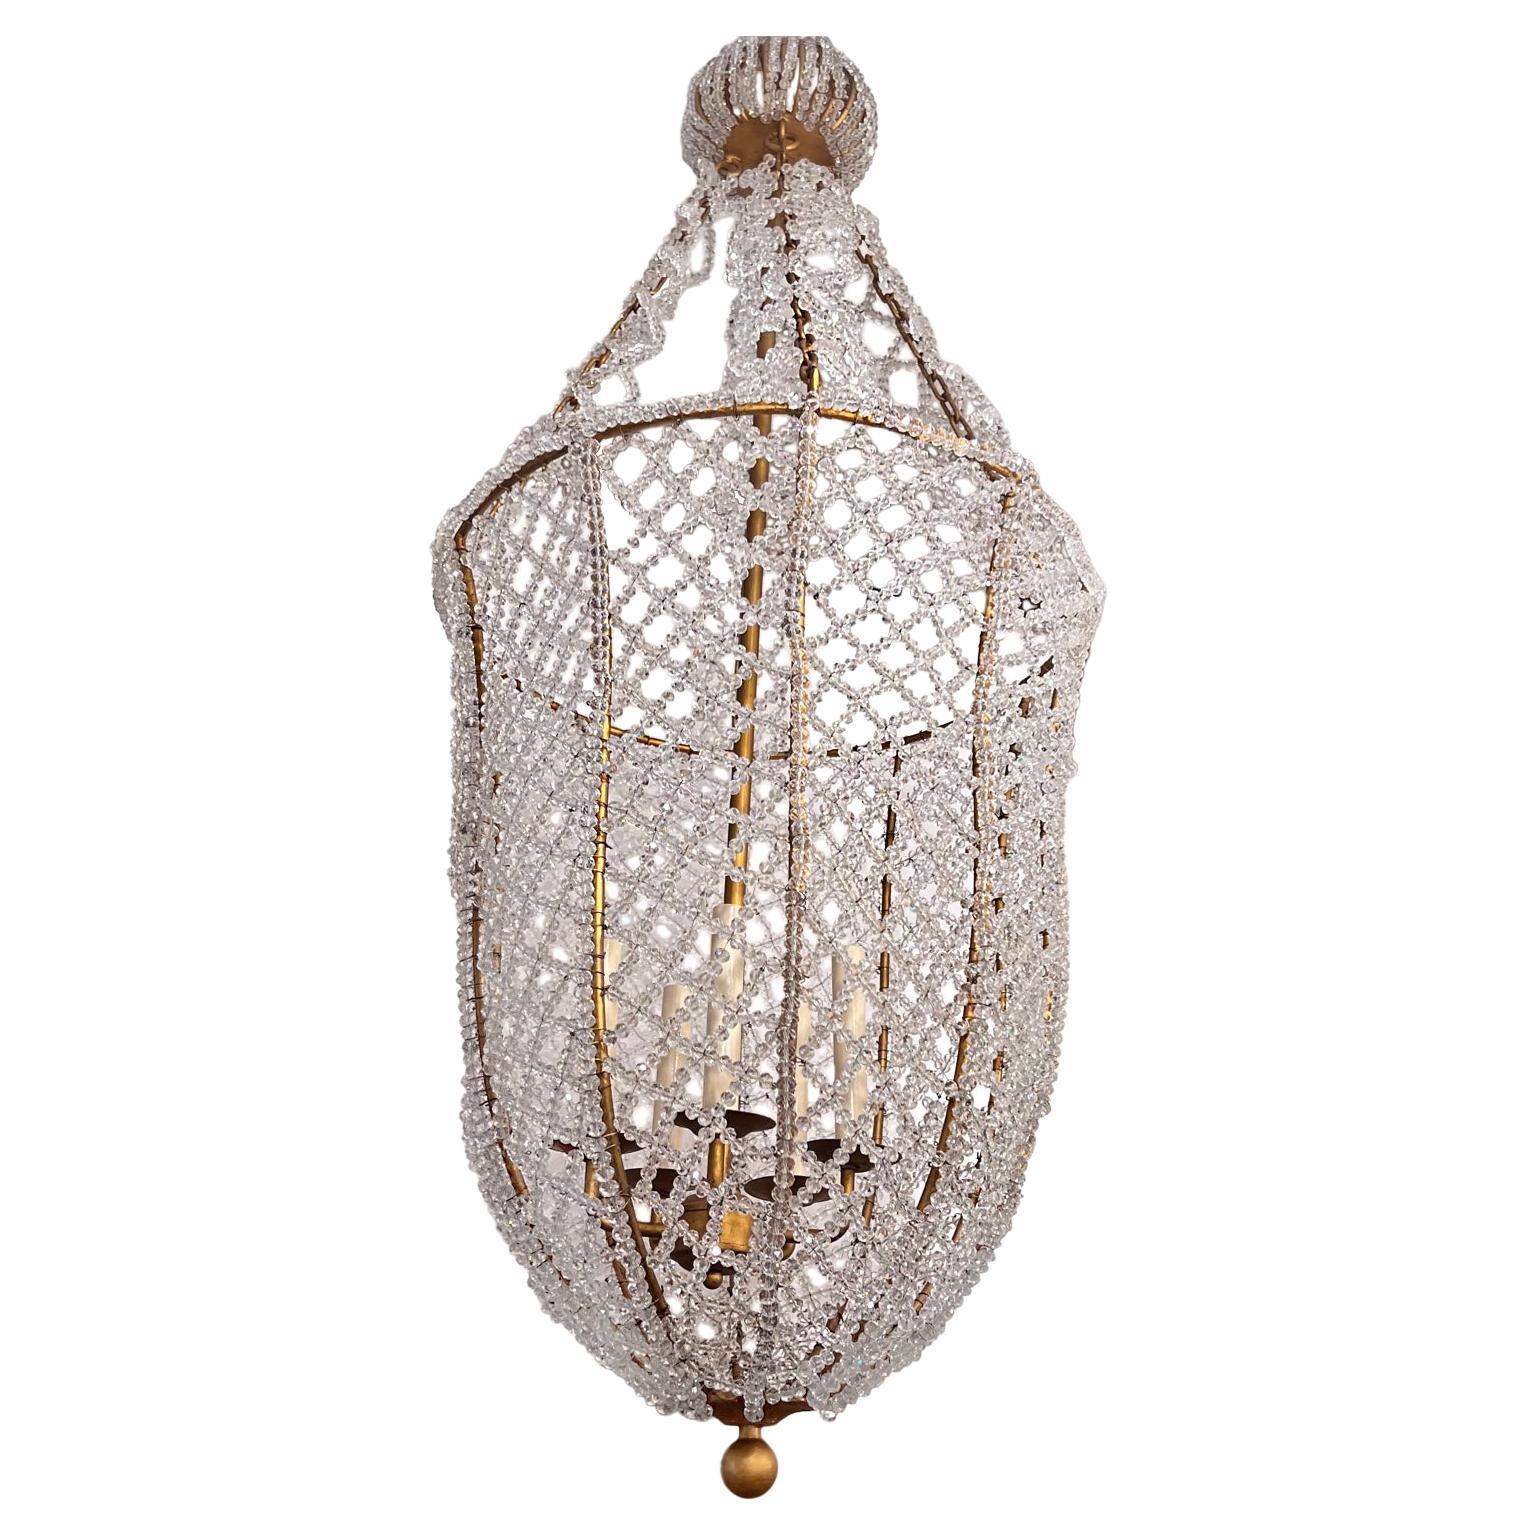 Pair of French Gilt Lanterns with Crystals